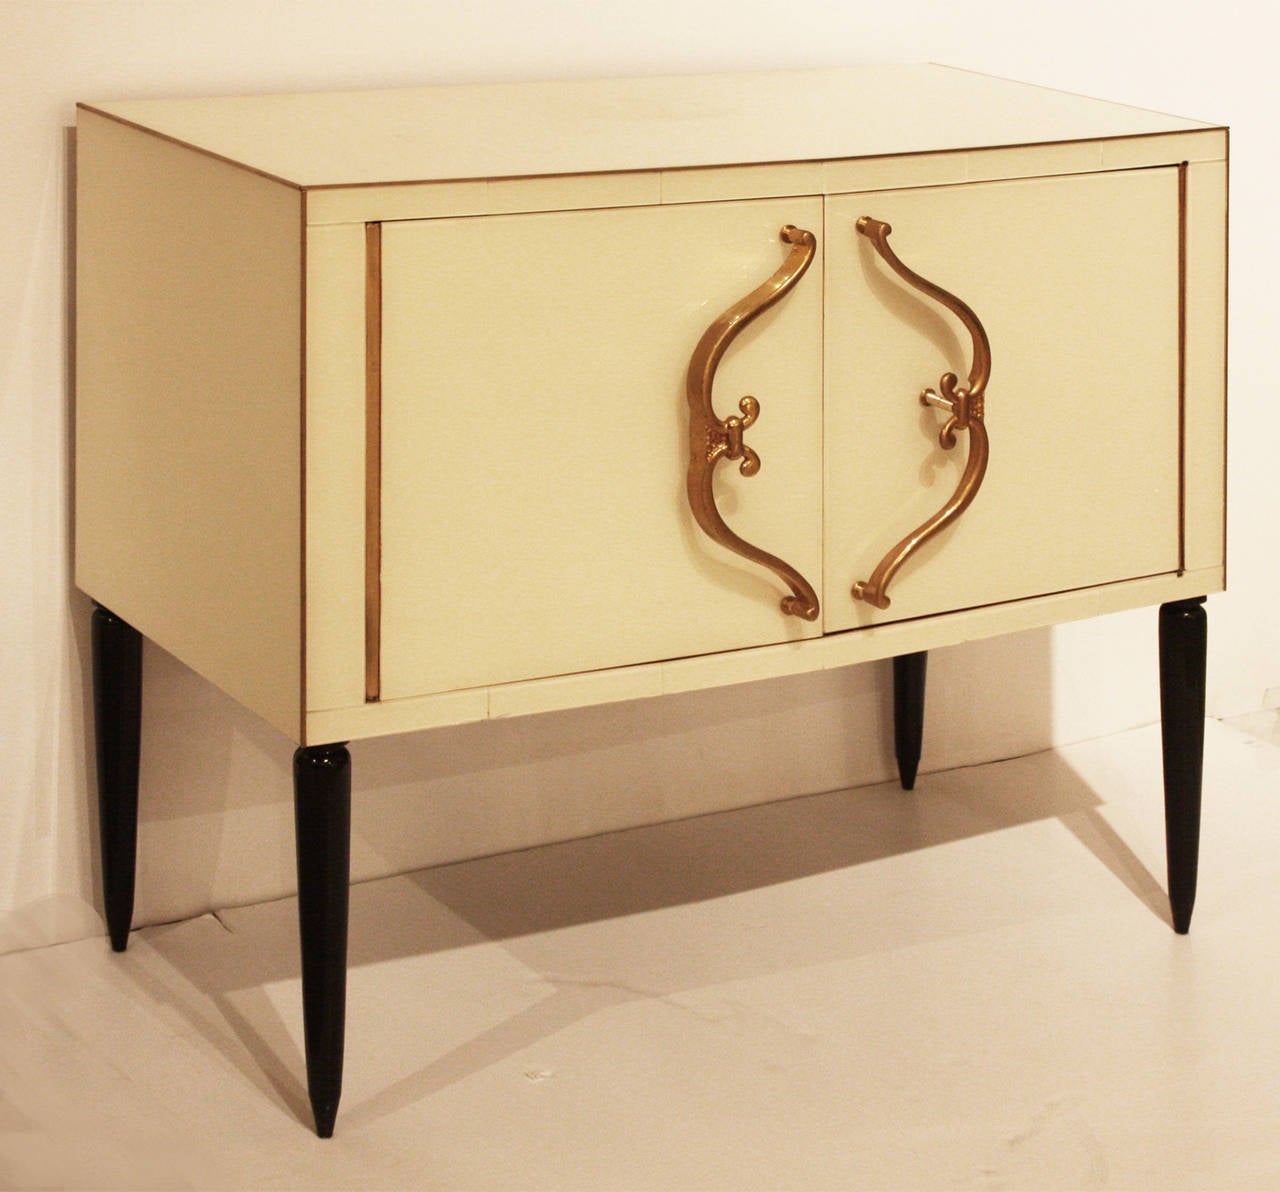 Sophisticated Mid-Century Modern French cabinet in glass over bone colored, painted wood with handsome bronze detailing and gilt bronze door hardware and elevated on ebonized legs. A closely related cabinet is pictured on the cover of